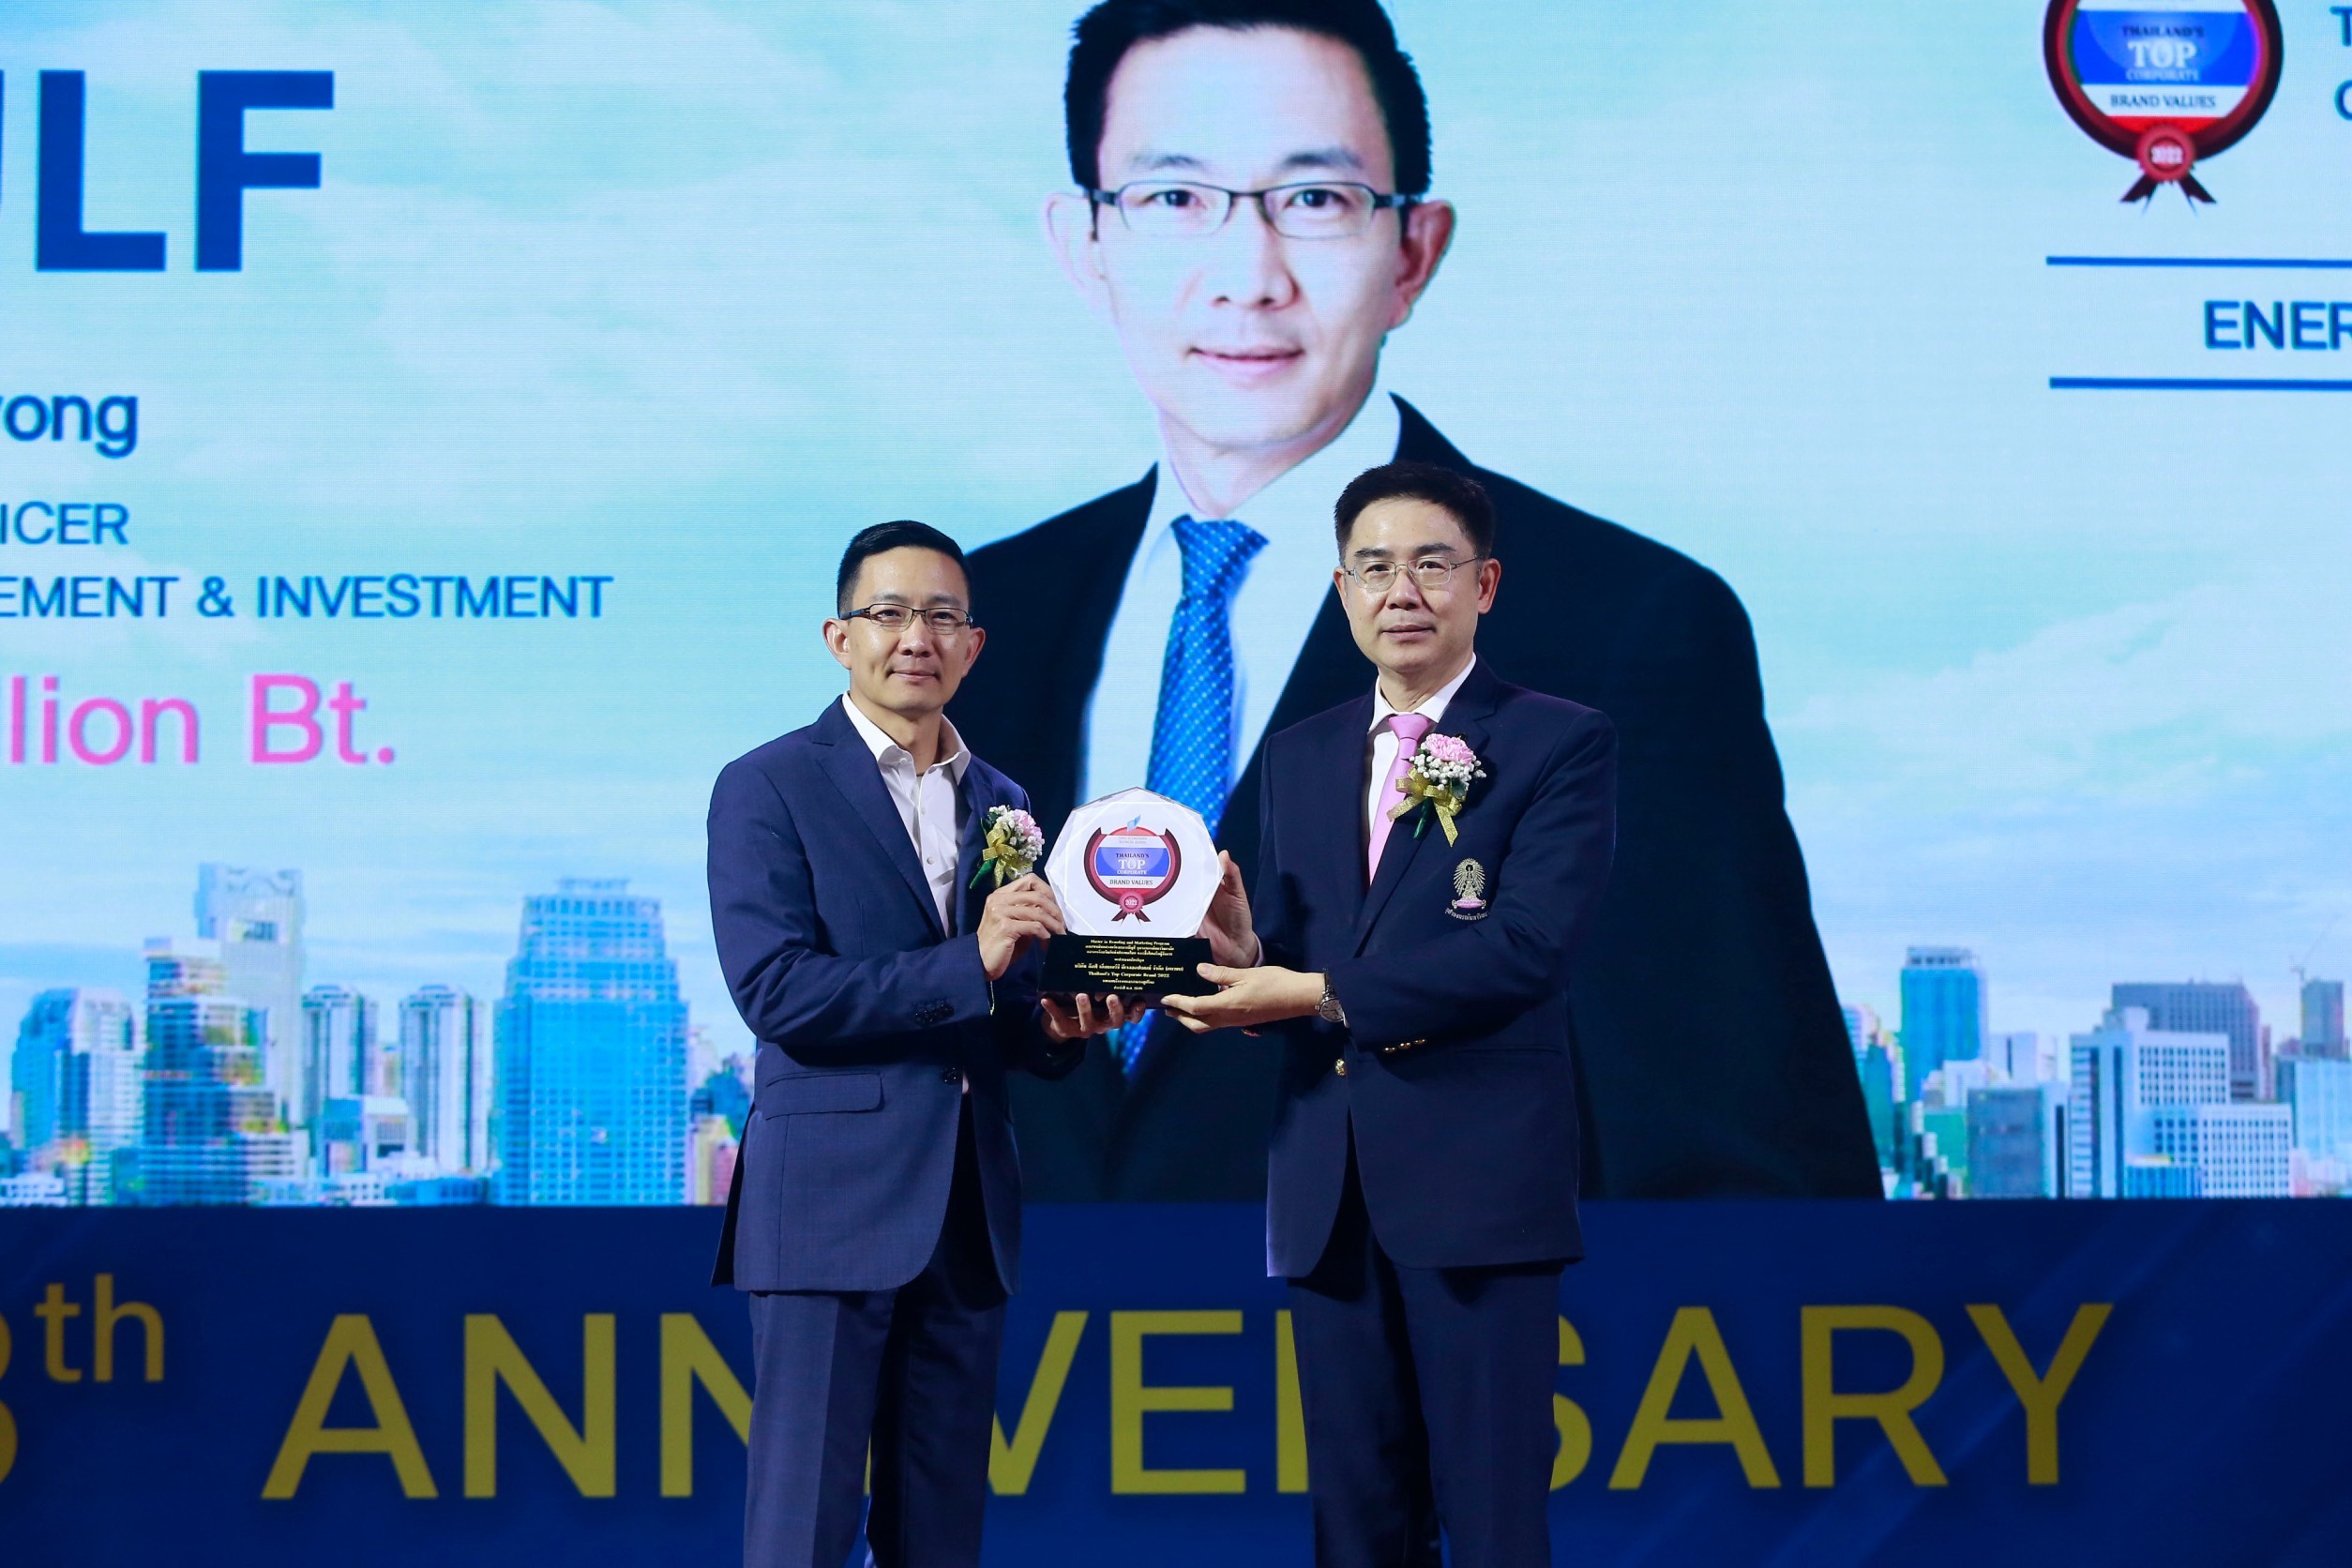 ‘GULF has been named ‘the highest corporate brand value’ in the energy and utilities category for two consecutive years from ASEAN and Thailand's Top Corporate Brands 2022’